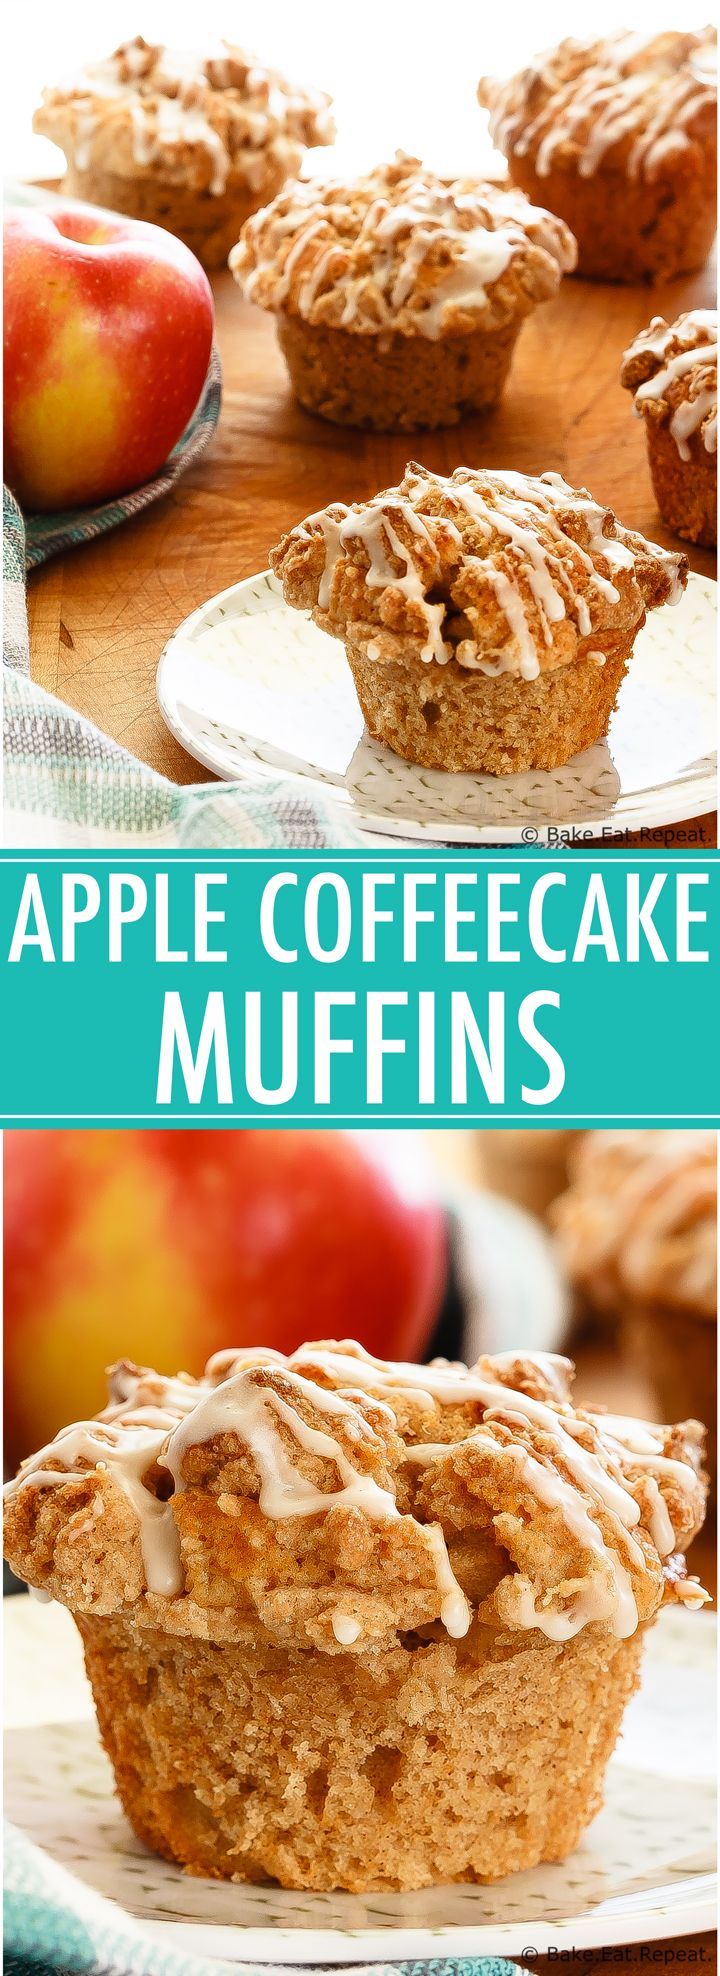 Apple Muffins with Crumb Topping Recipe -   21 breakfast recipes muffins
 ideas